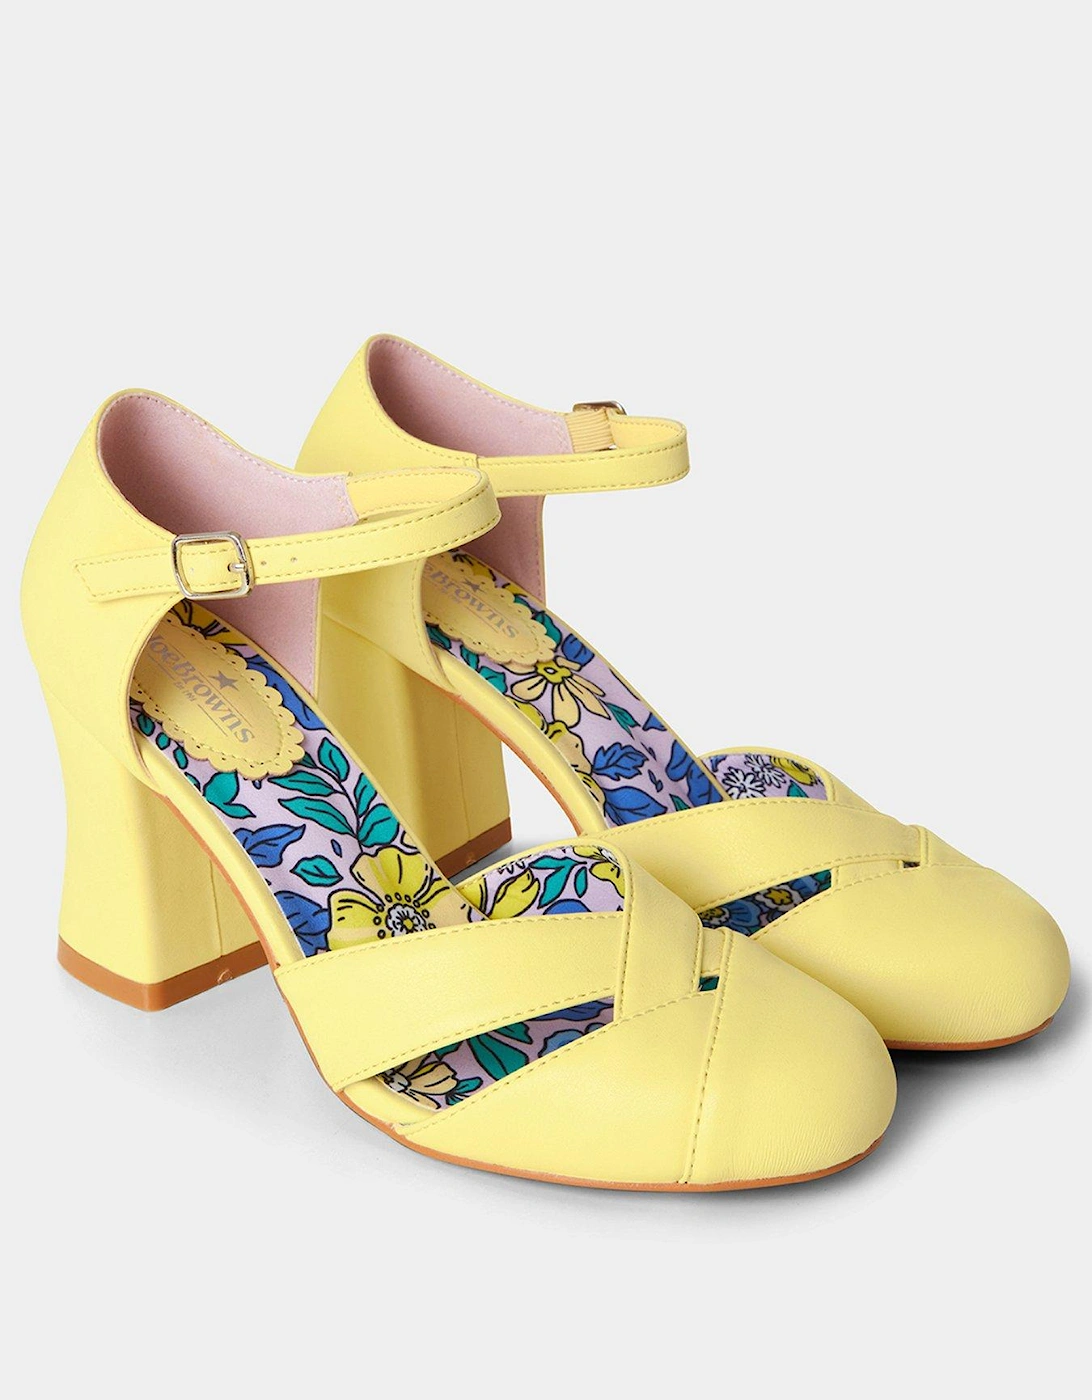 Vintage Style Shoes - Yellow